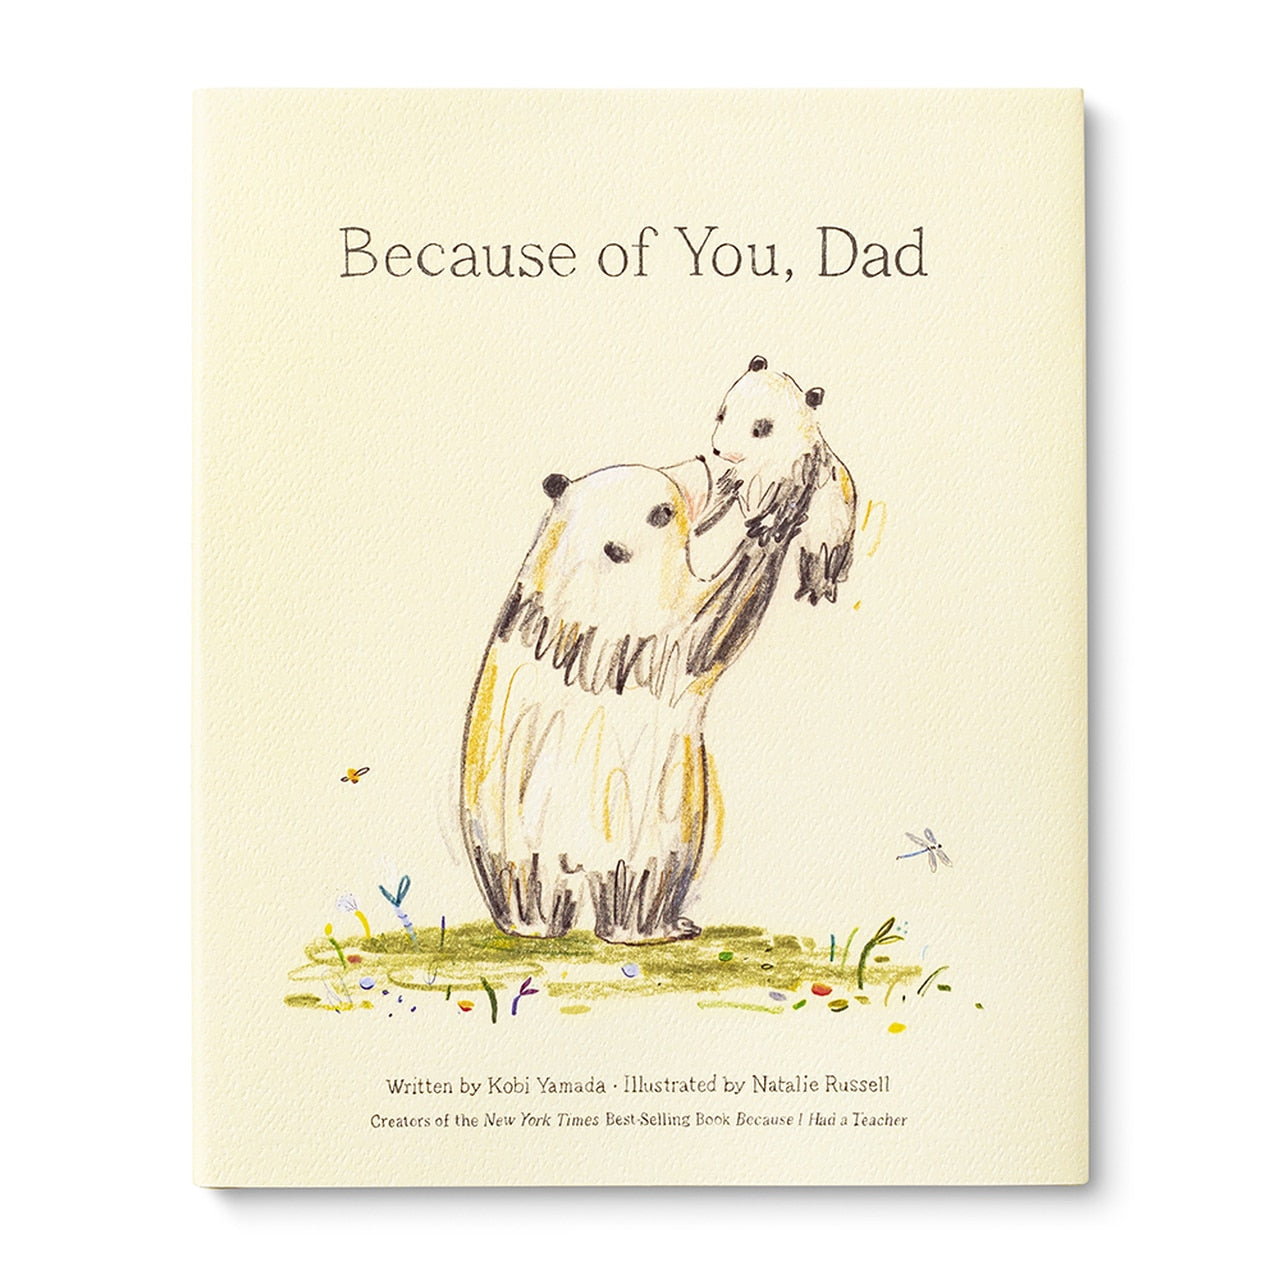 Because of You, Dad by Kobi Yamada and Natalie Russell